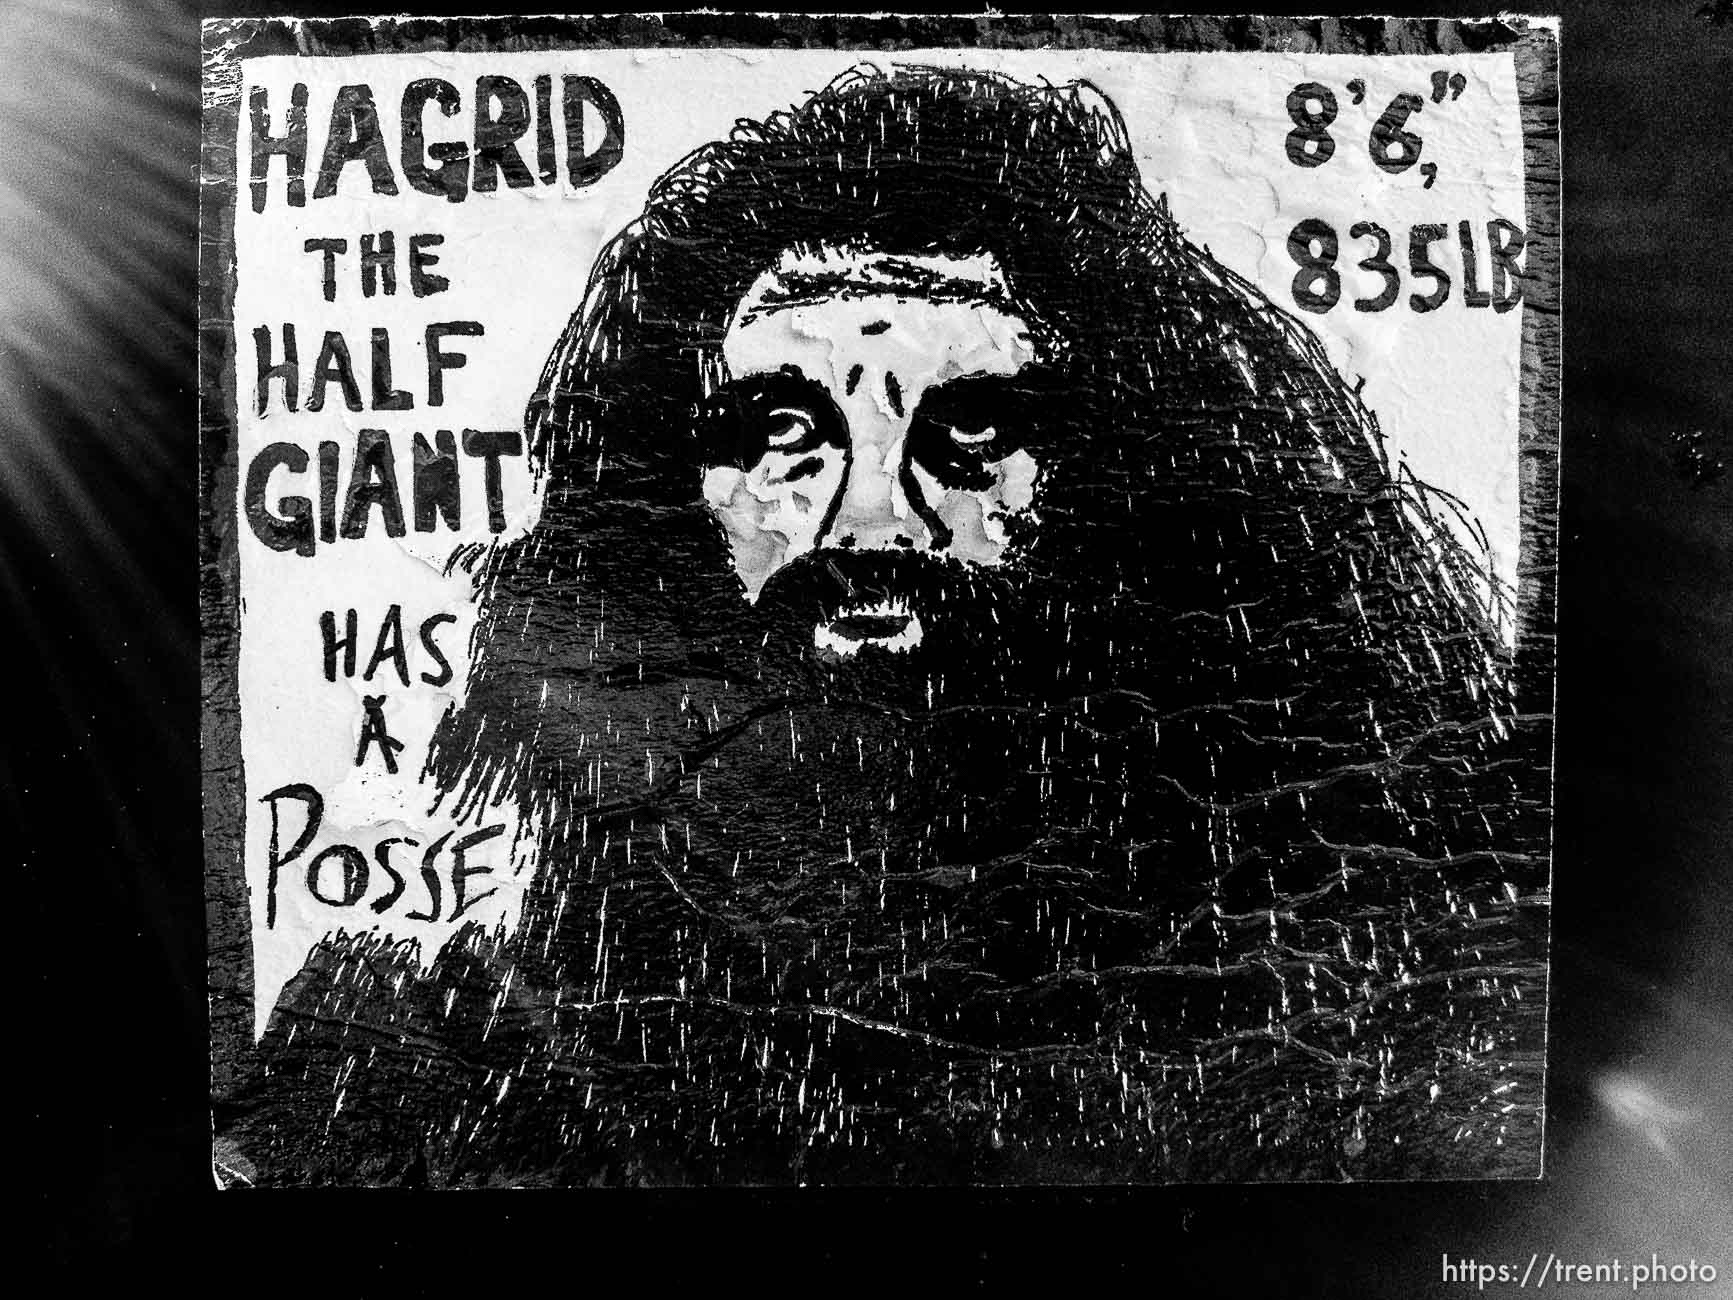 Hagrid the Half Giant has a Posse